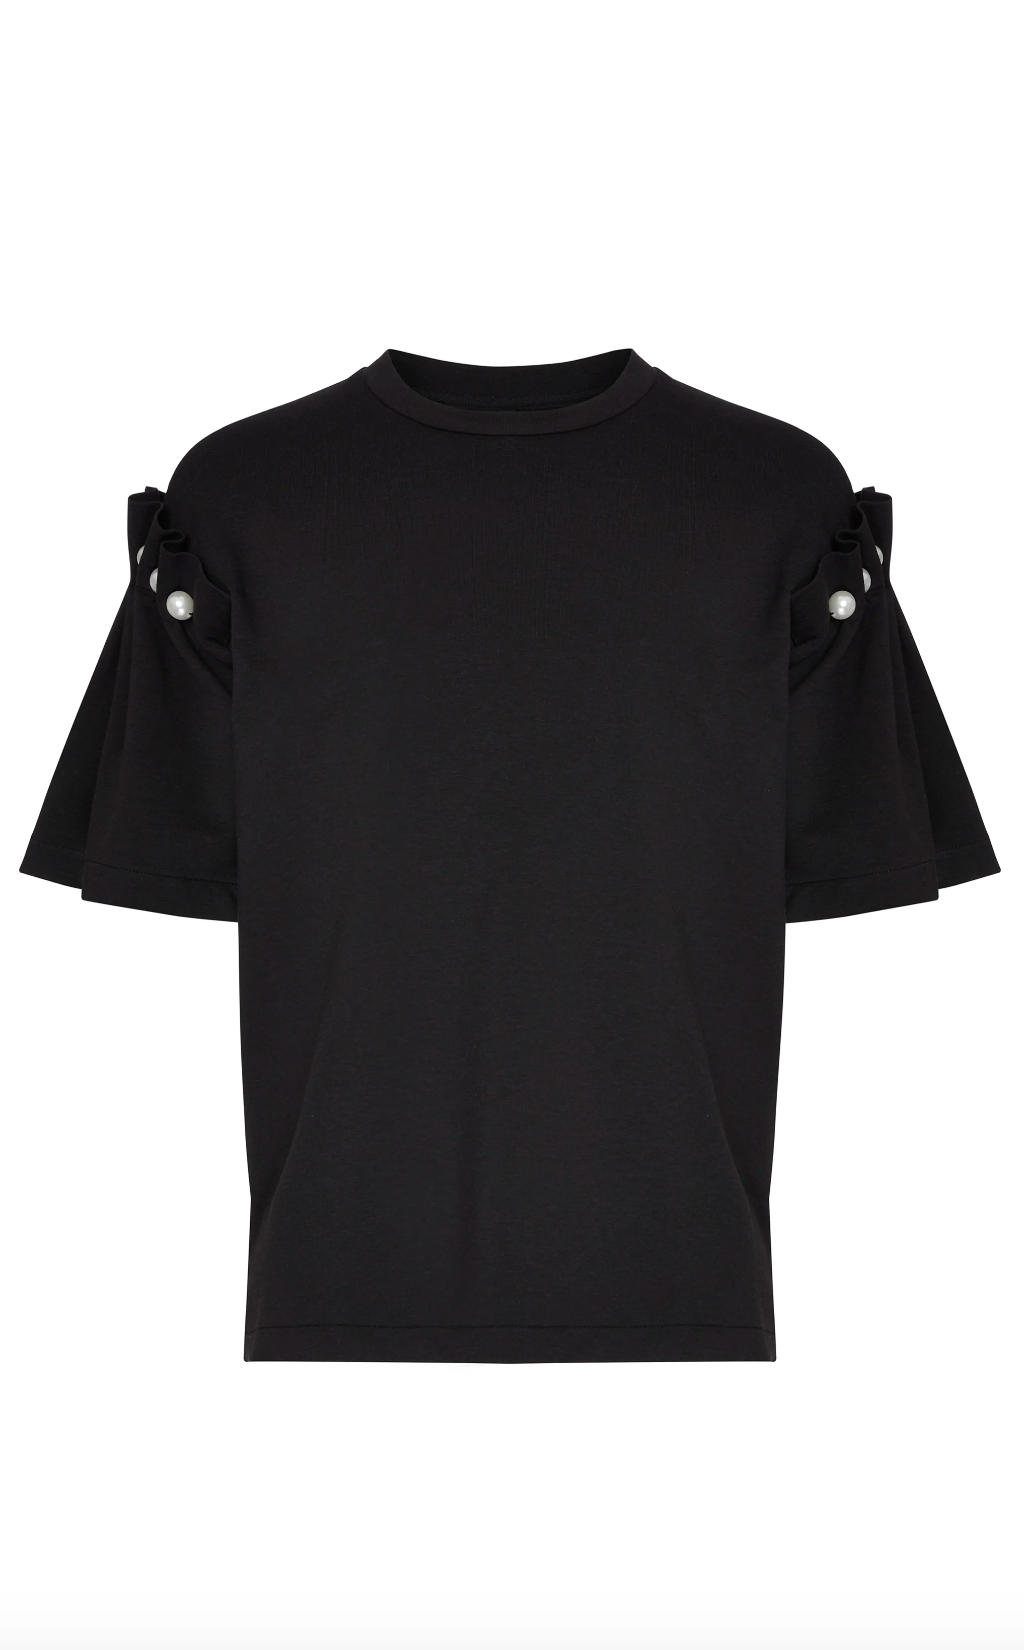 Mother of Pearl - Amber Pearl Black T-Shirt - Image 3